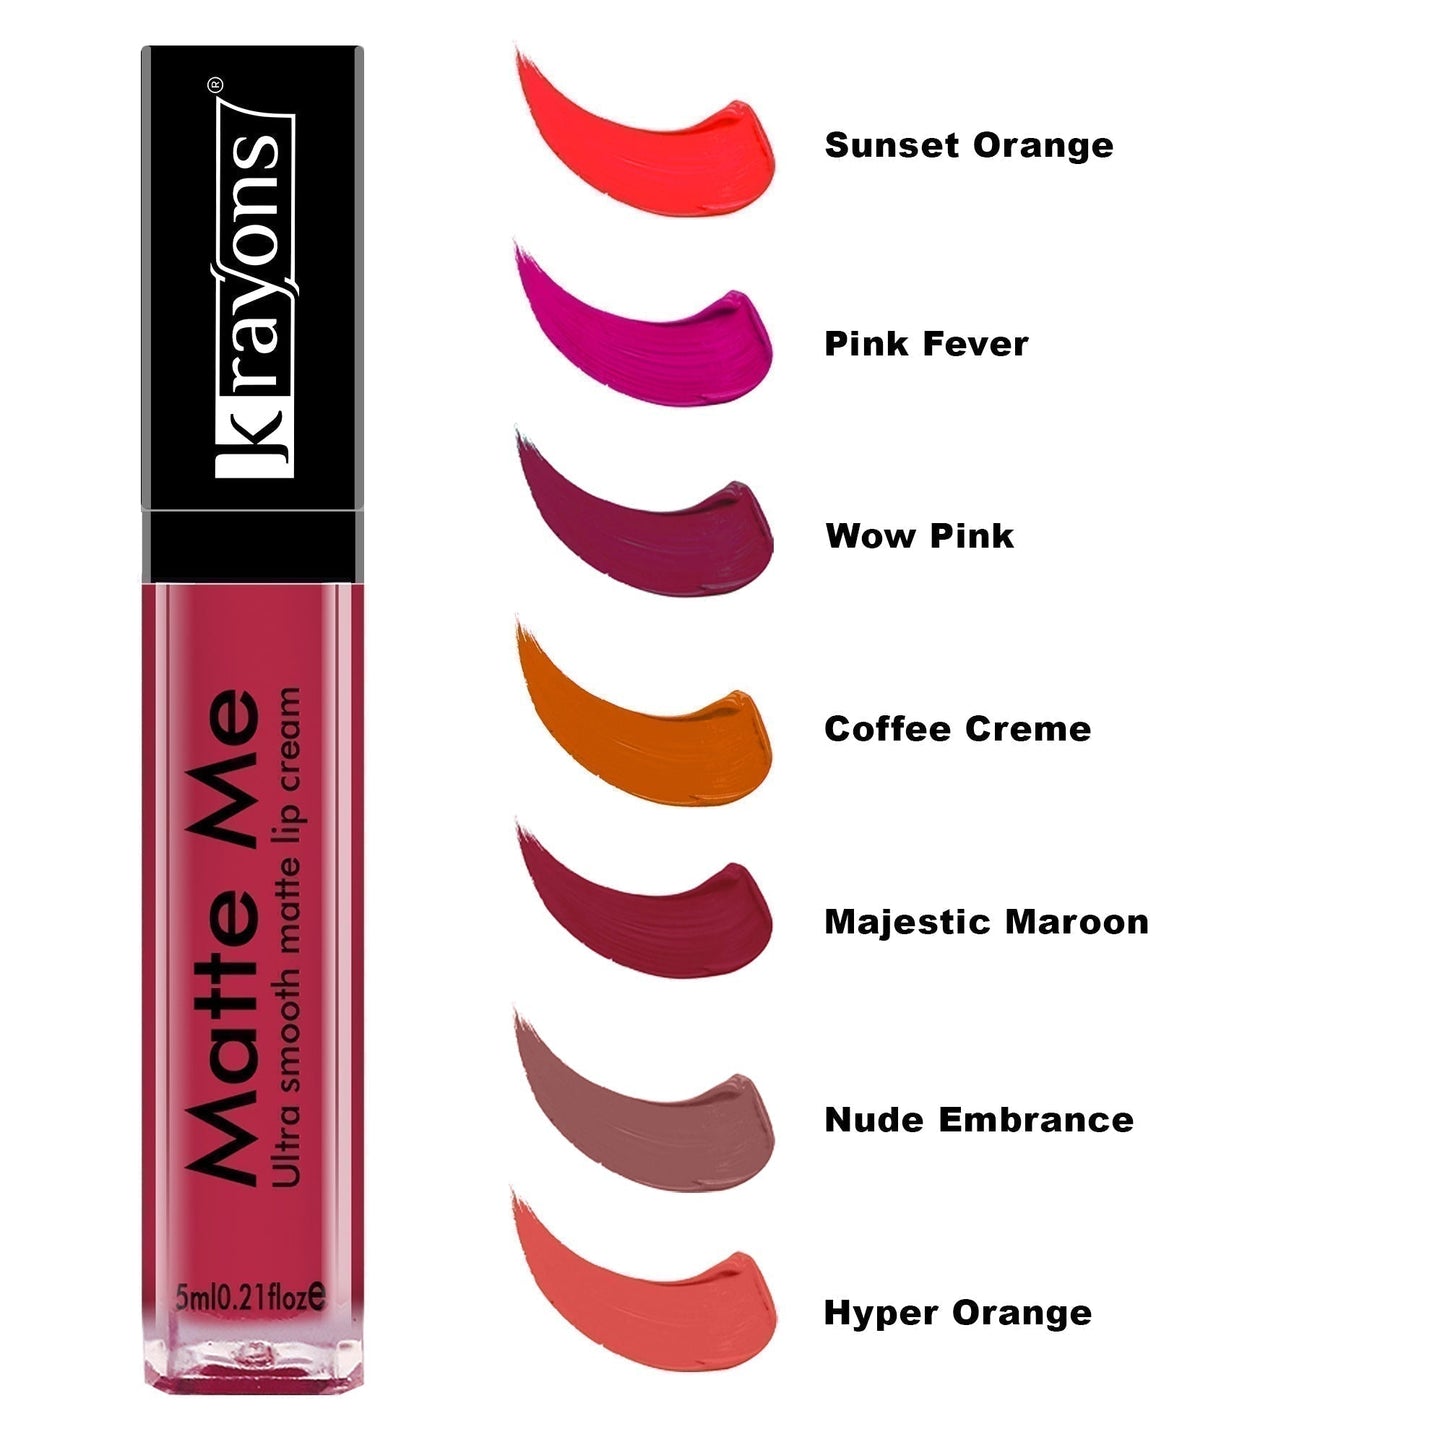 Krayons Matte Me Ultra Smooth Matte Liquid Lip Color, Mask Proof, Waterproof, Longlasting, 5ml Each, Combo, Pack of 3 (Sunset Orange, Pink Fever, Wow Pink)